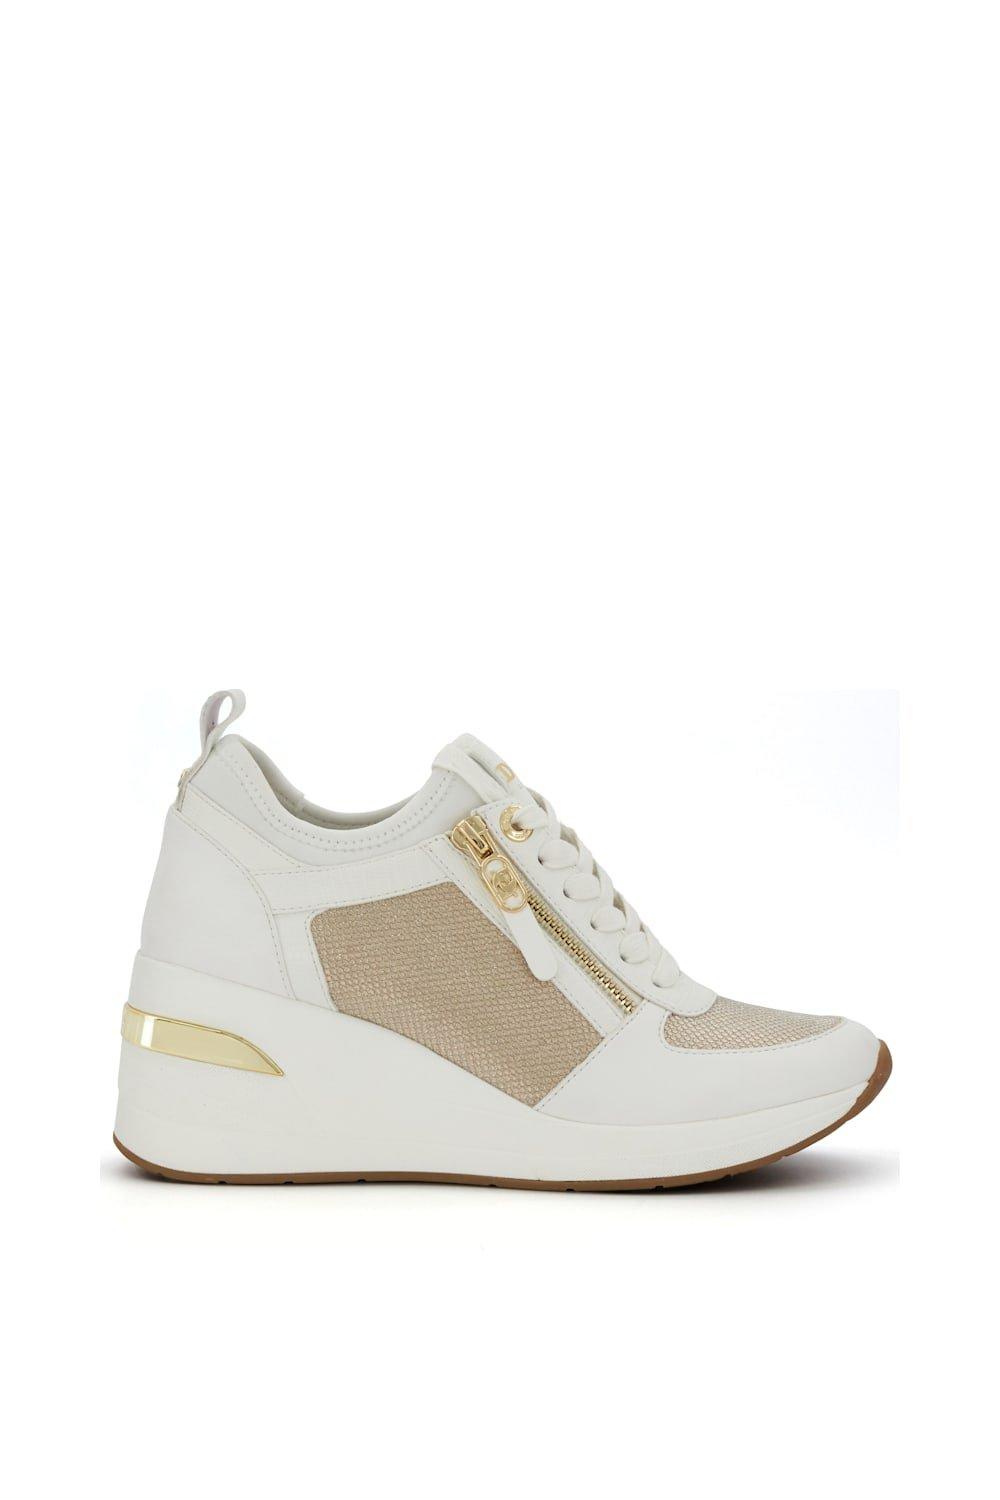 Trainers | 'Eiline' Leather Trainers | Dune London